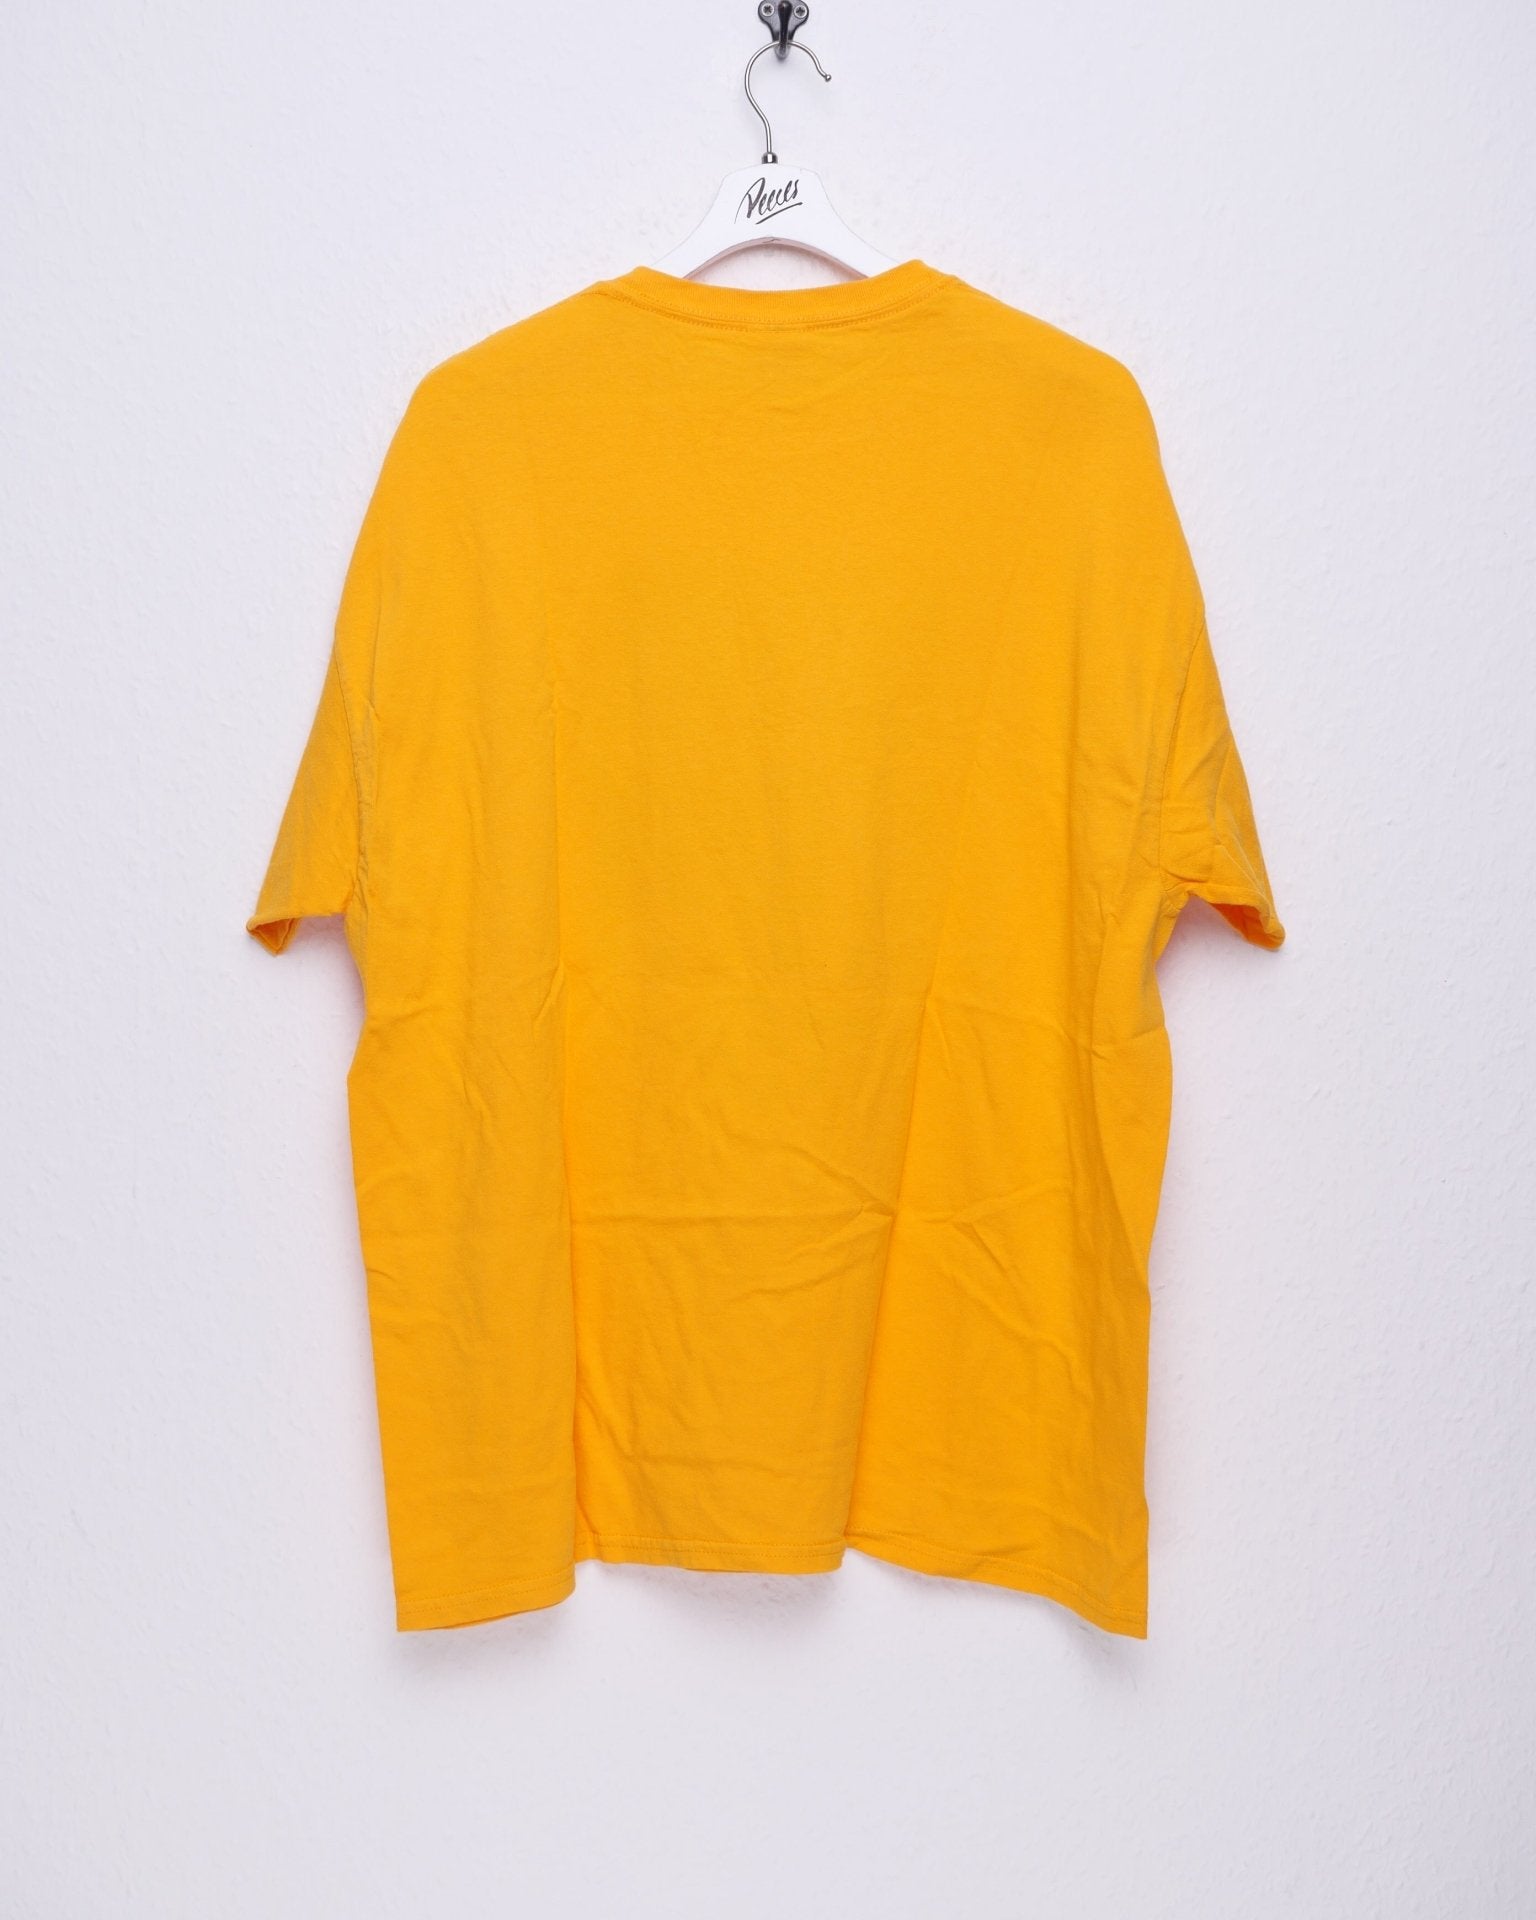 printed Spellout oversized yellow Shirt - Peeces